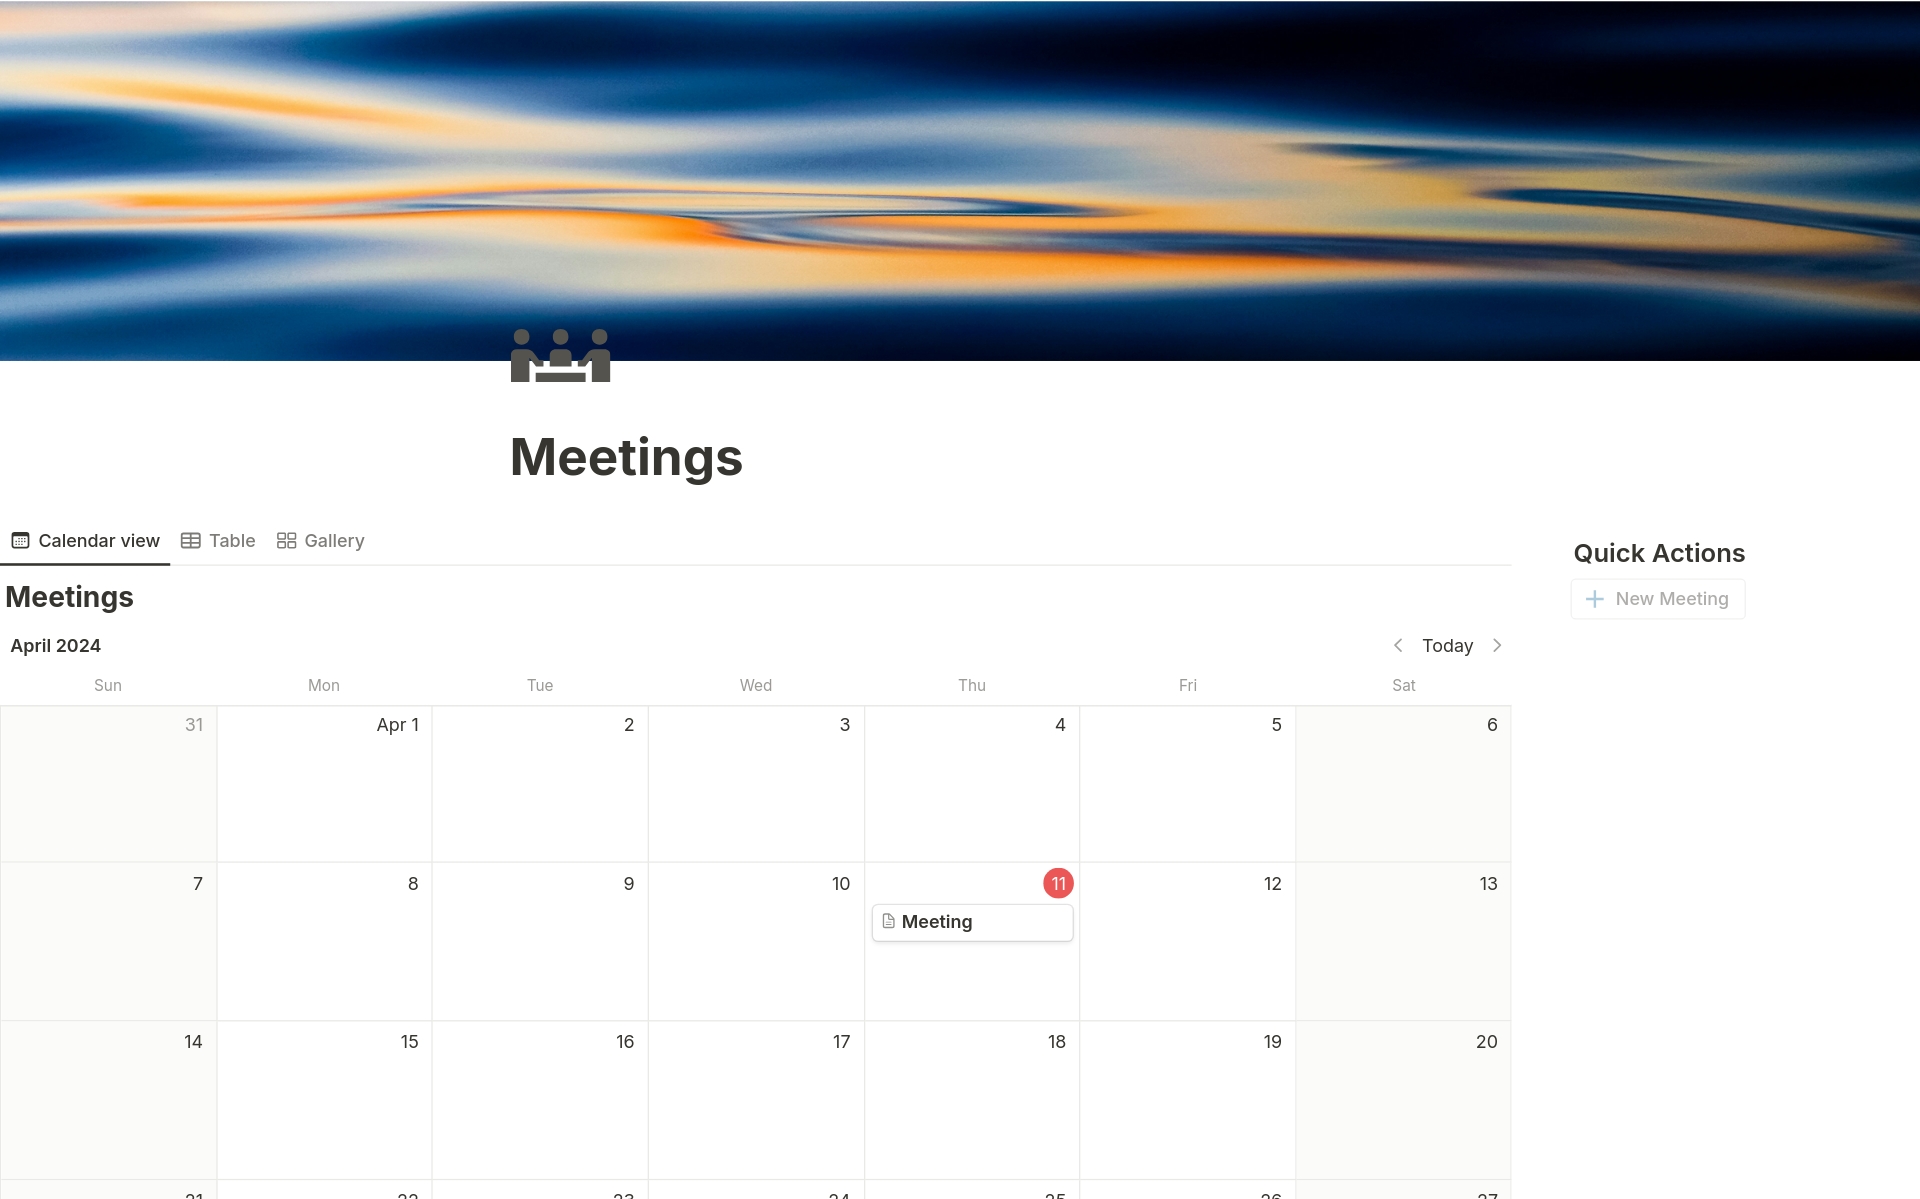 want to simplify the creation of the meetings?

